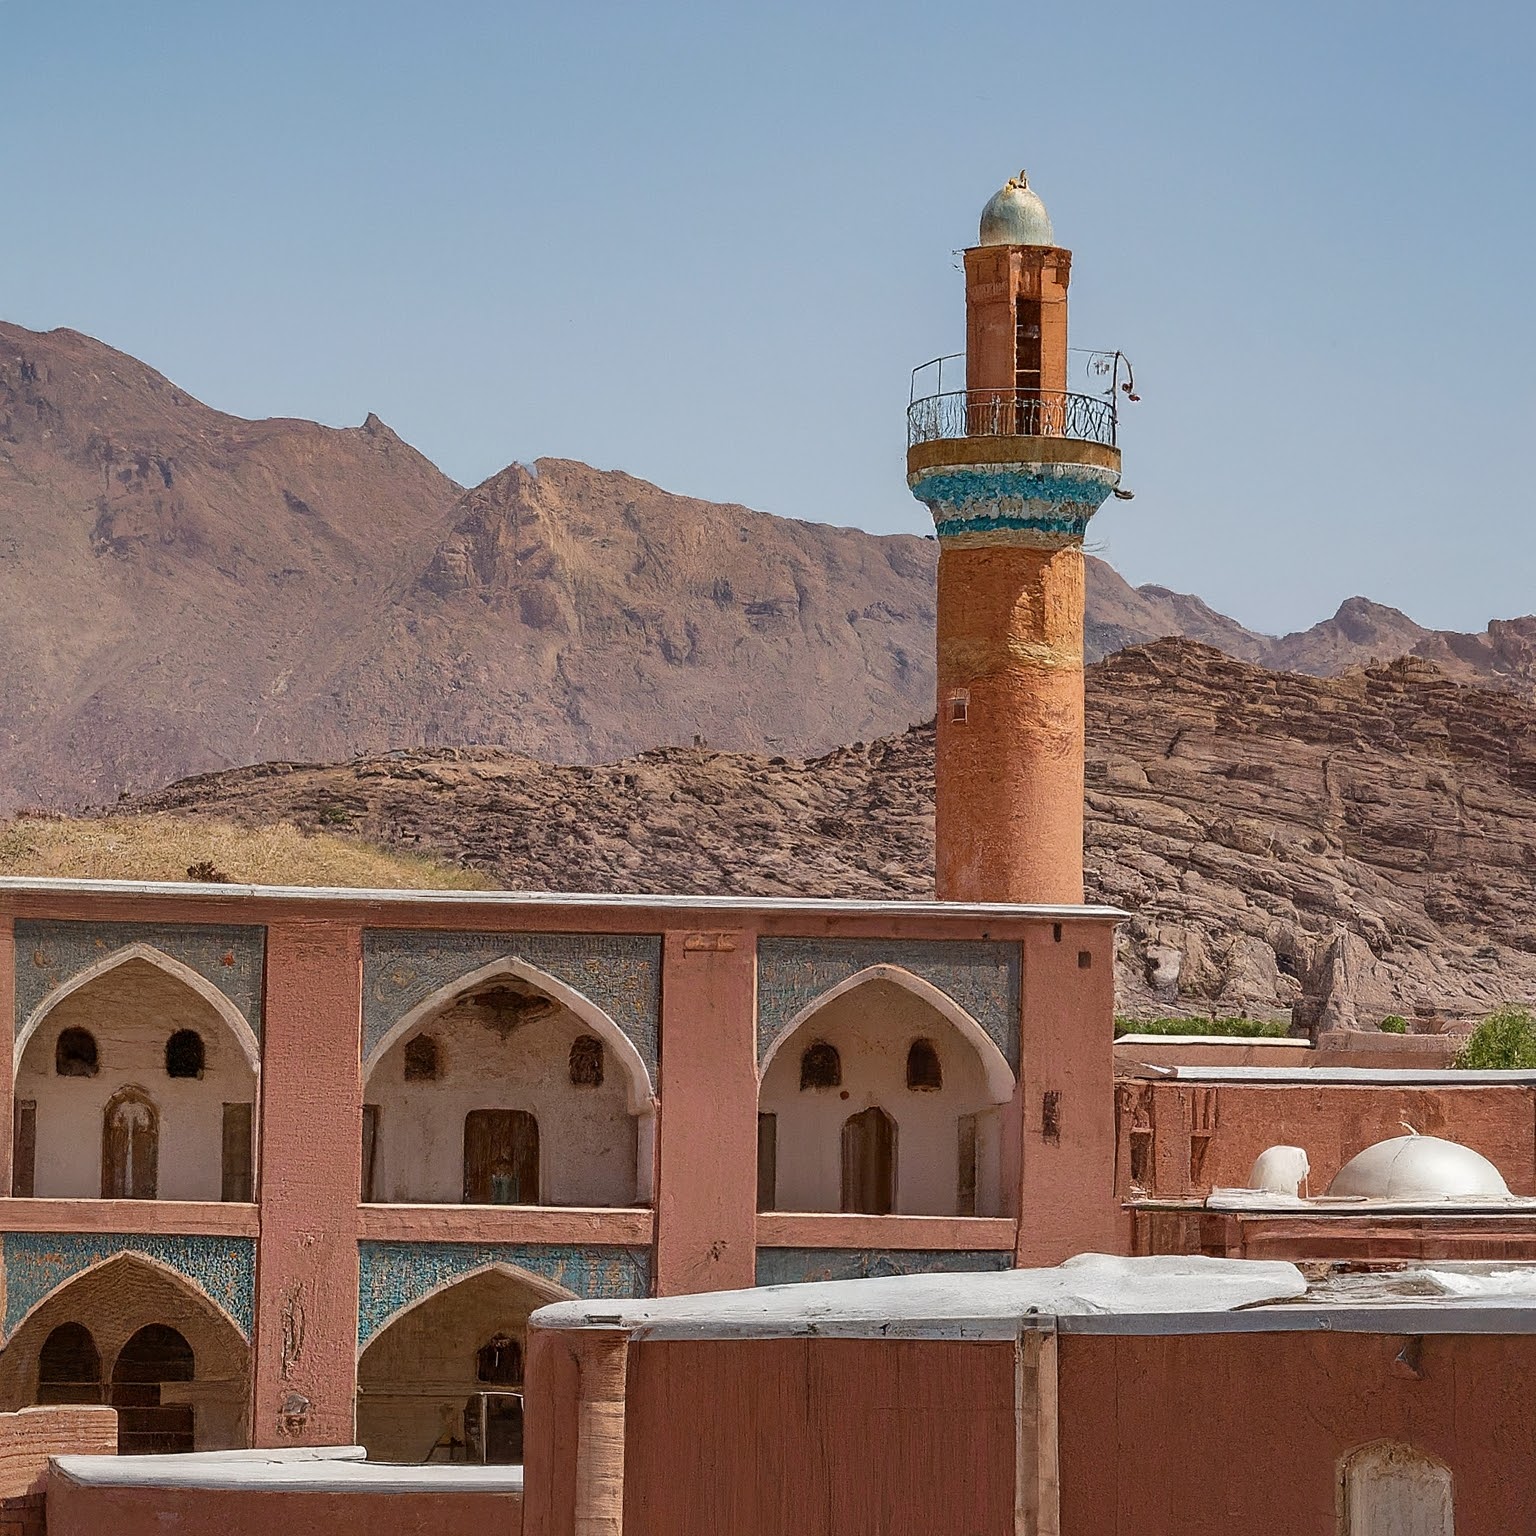 The historic Jameh Mosque of Abyaneh, Iran, with intricate brickwork and a towering minaret.